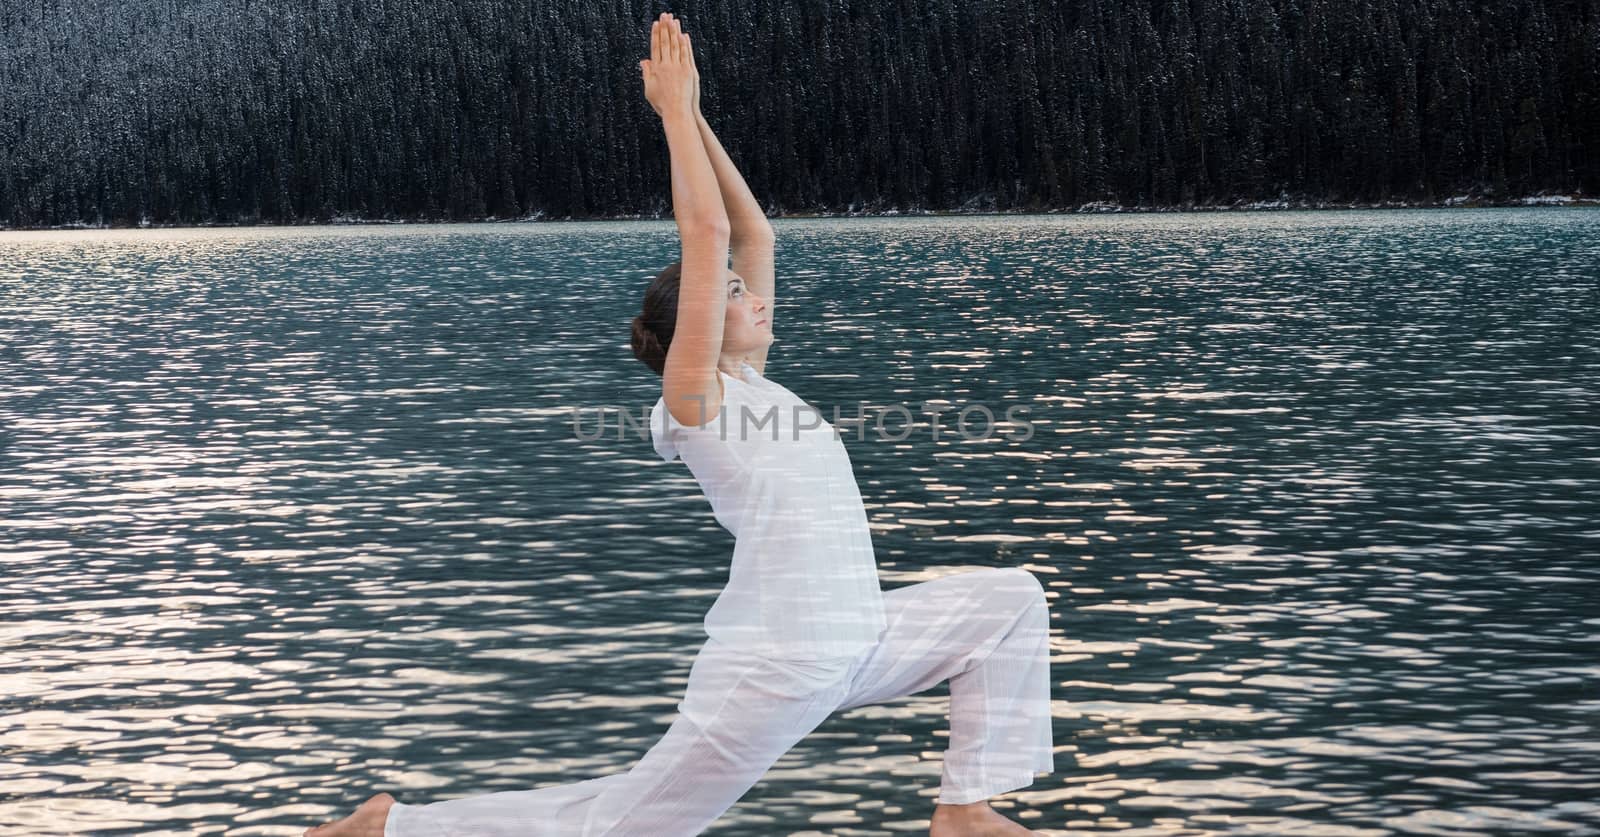 Digital composite of Double exposure of woman performing yoga by lake